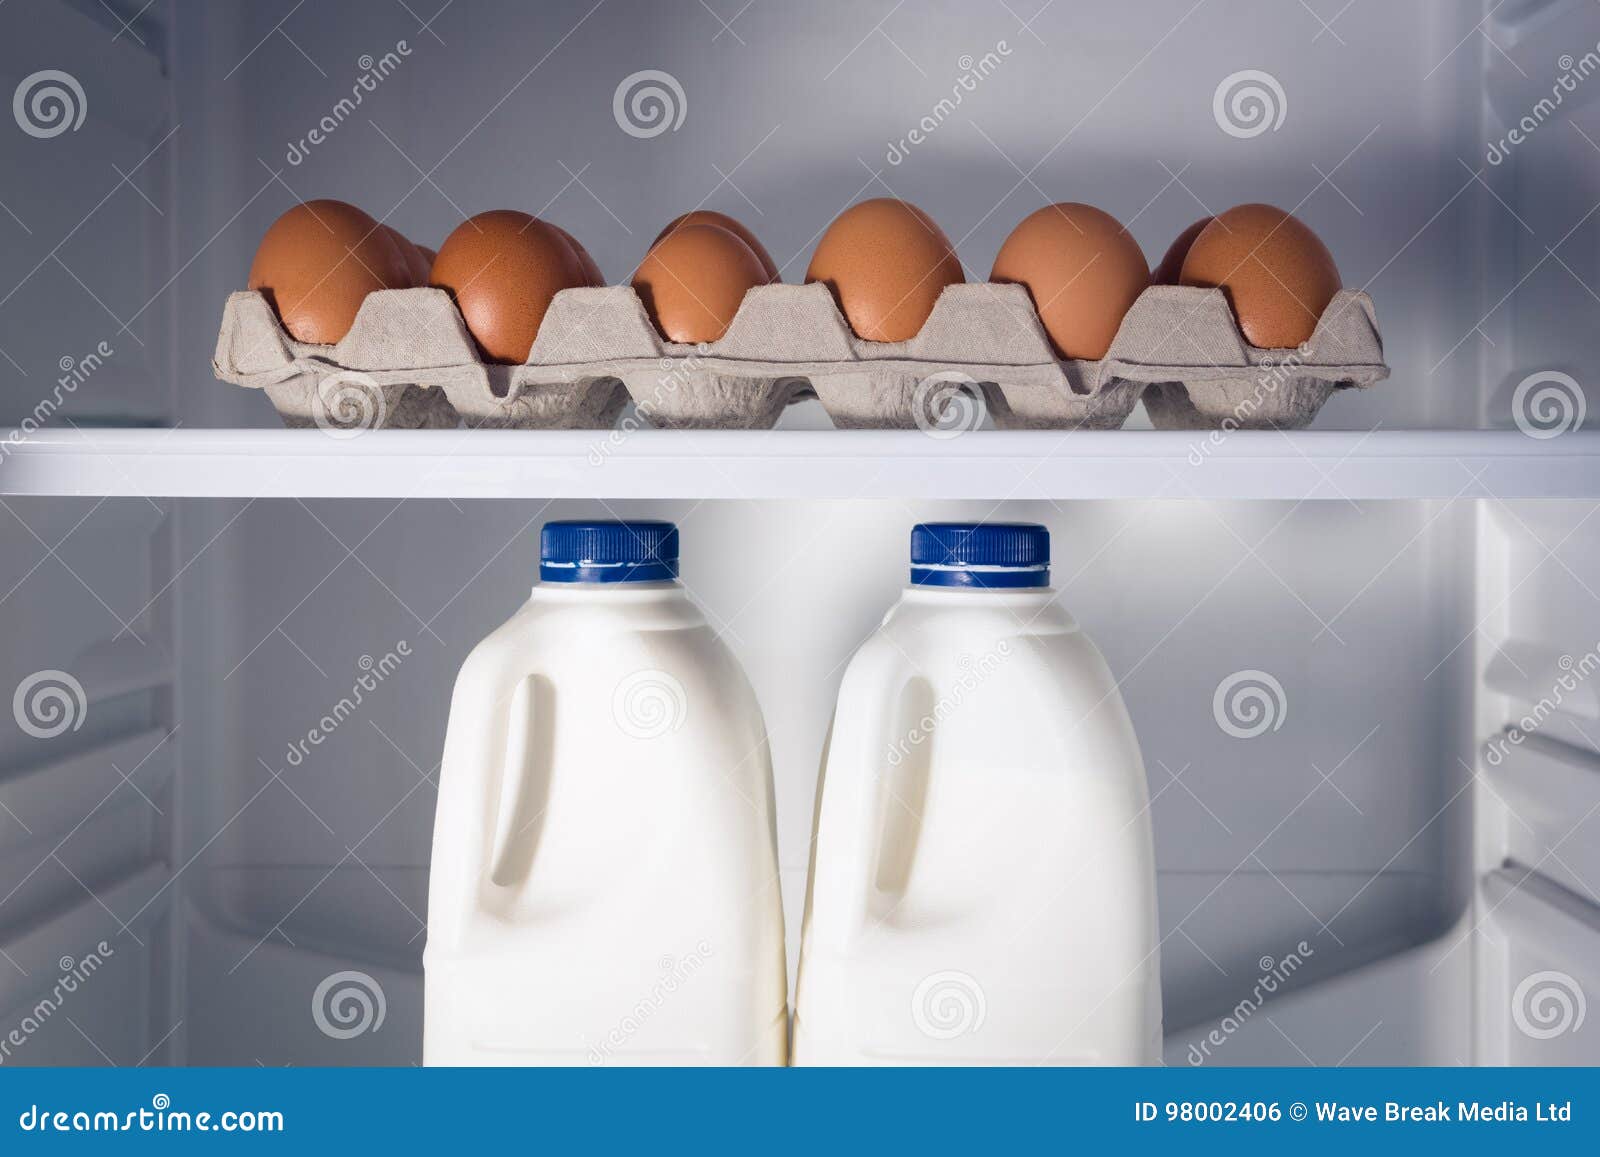 Milk in refrigerator stock photo. Image of container - 11894526